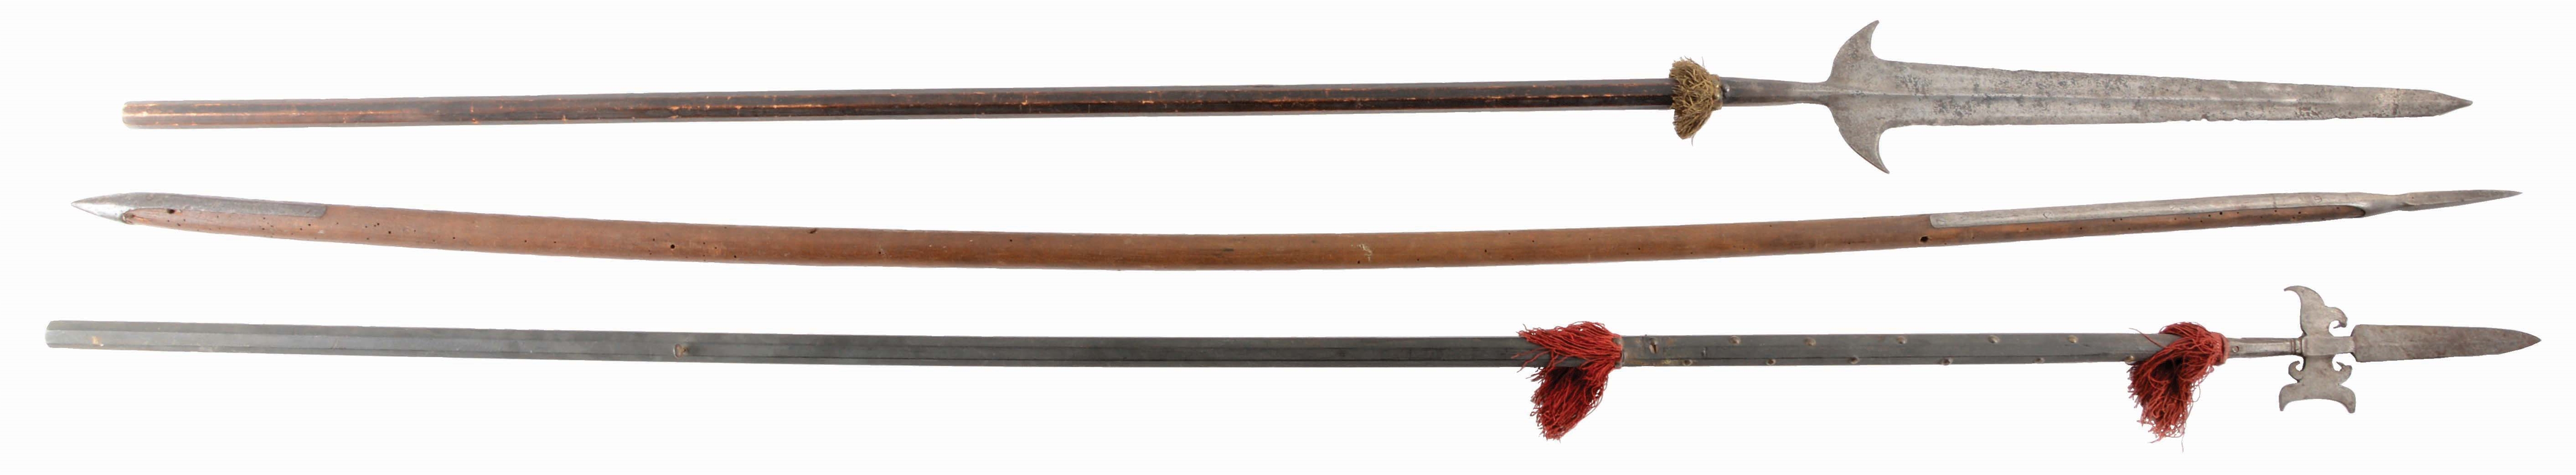 LOT OF 3: THREE ANTIQUE EUROPEAN POLEARMS INCLUDING A LATE 16TH CENTURY PARTISAN. 